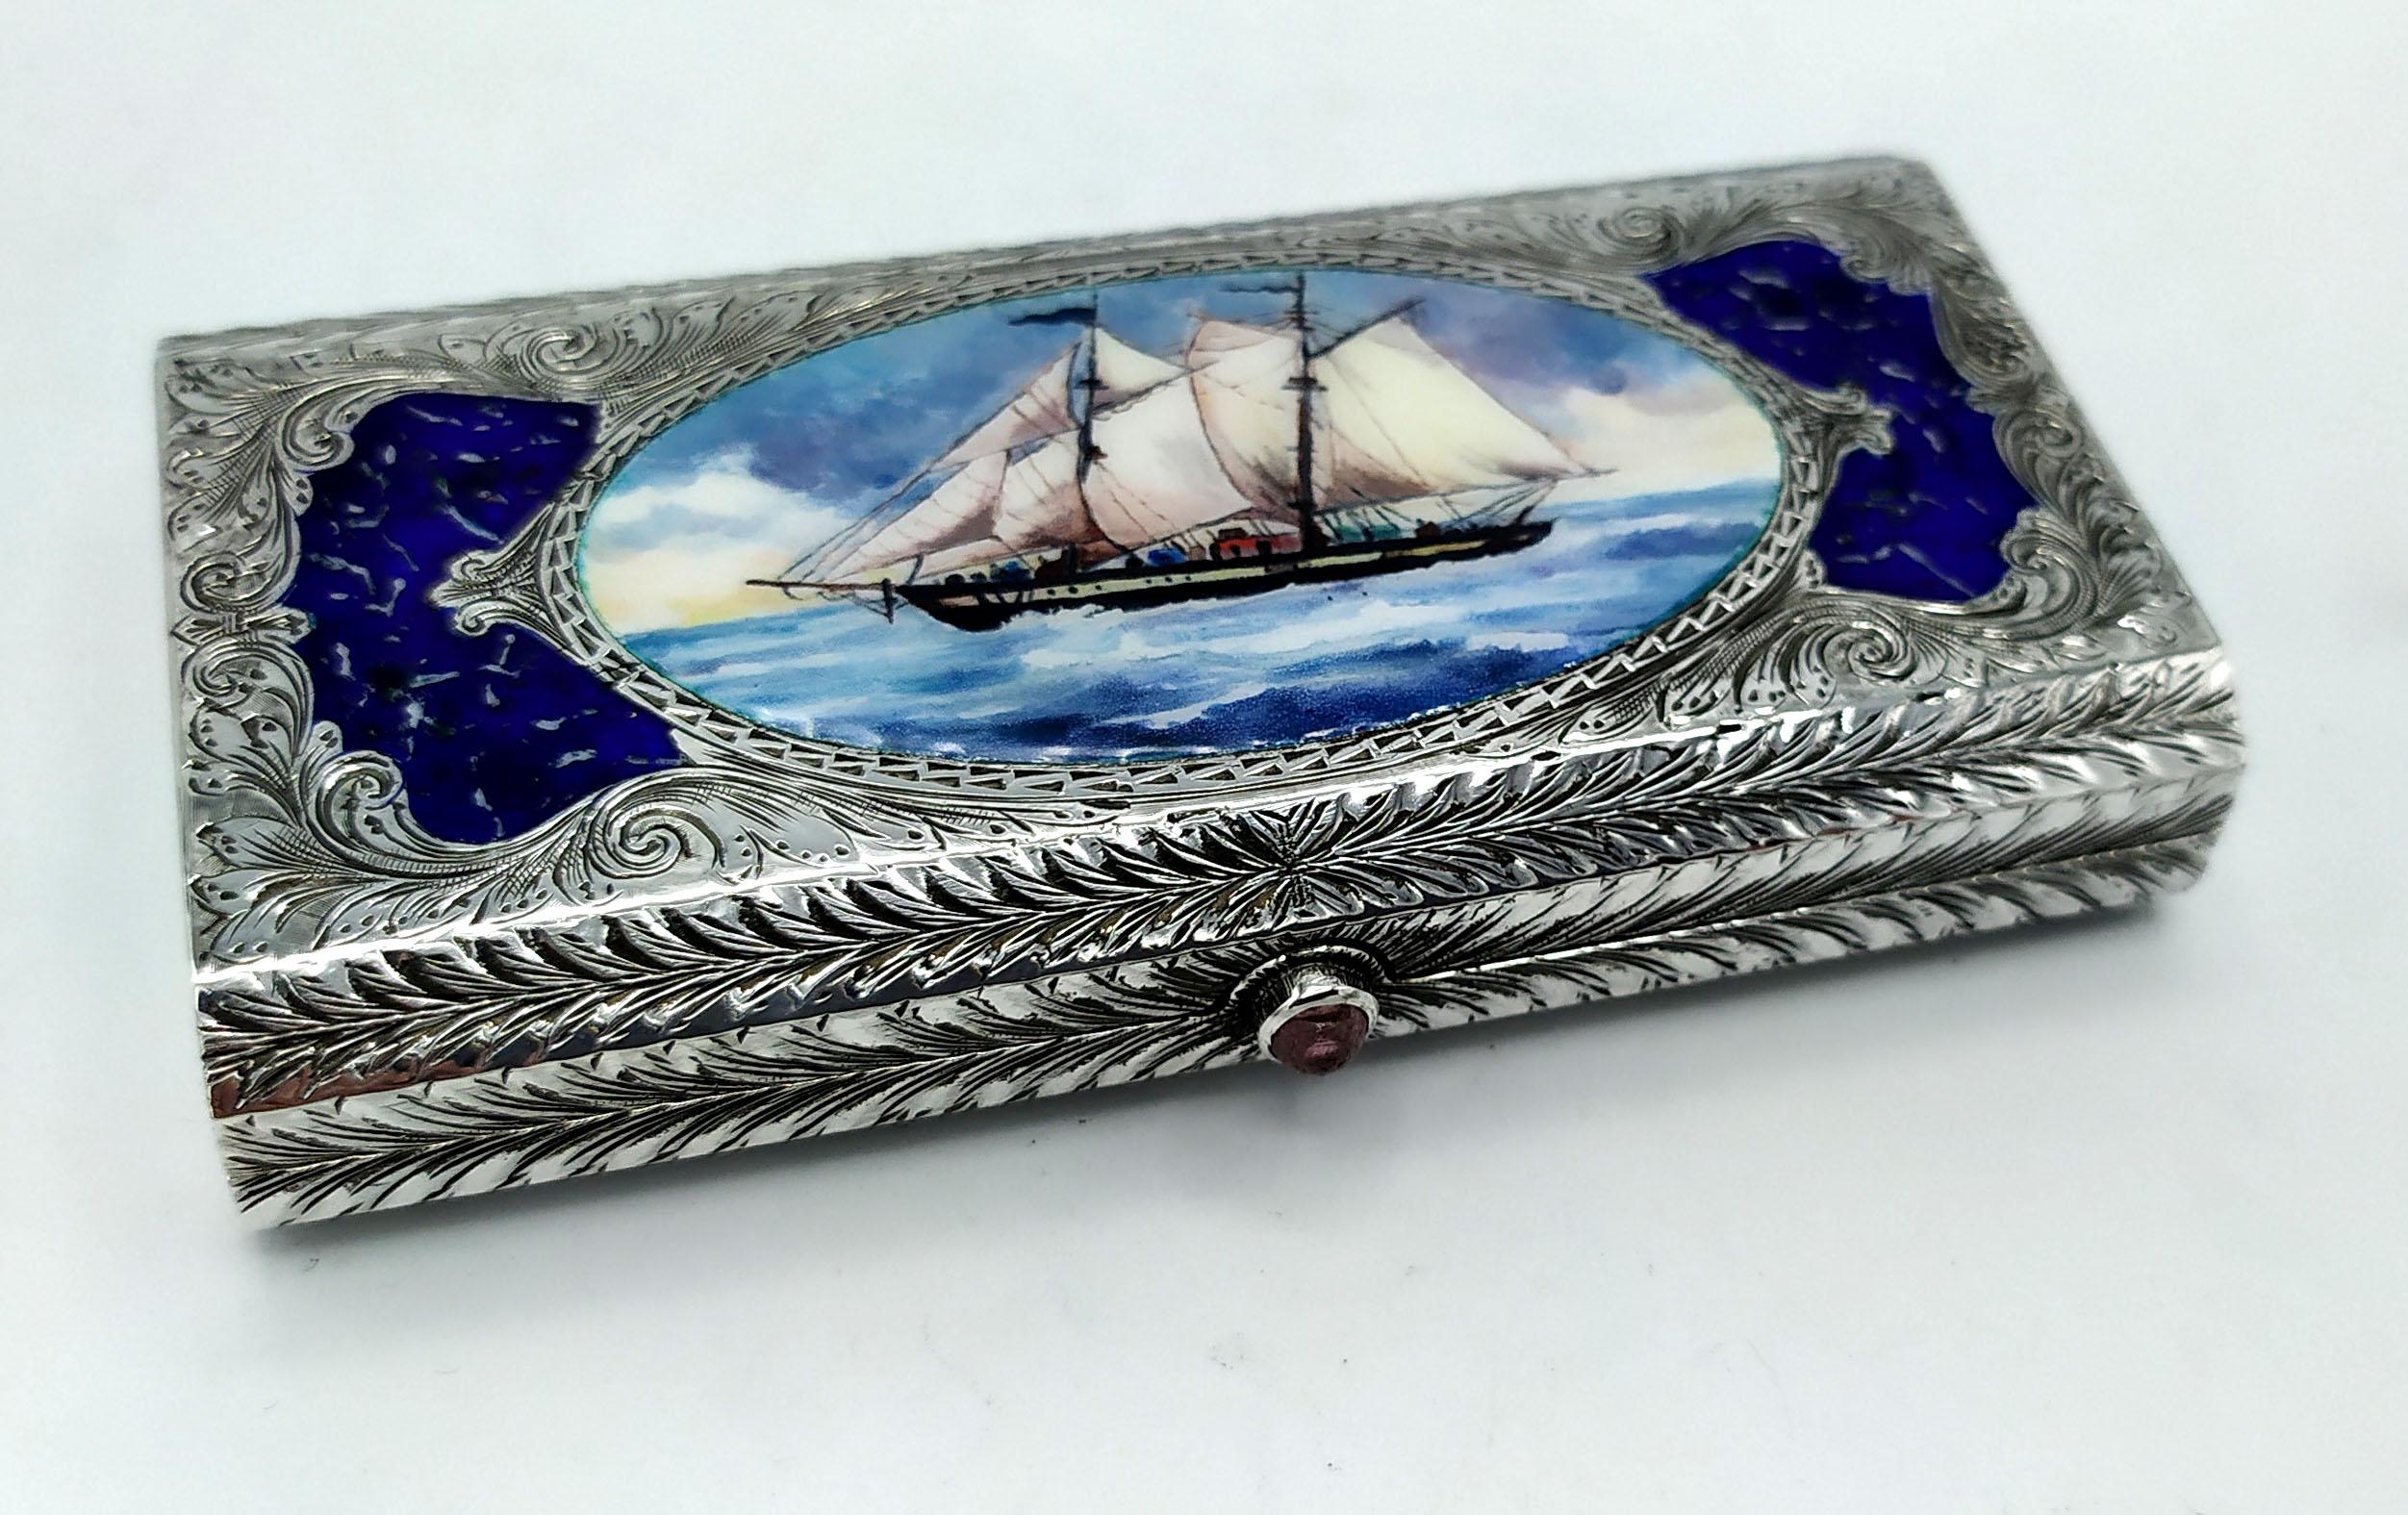 6238-7239- Pocket cigarette case with spring button in 925/1000 fire-enamelled sterling silver with beautiful vessel miniature hand-painted by the painter Renato Dainelli and painted enamel inserts like lapis lazuli stone. Fine finishing with hand